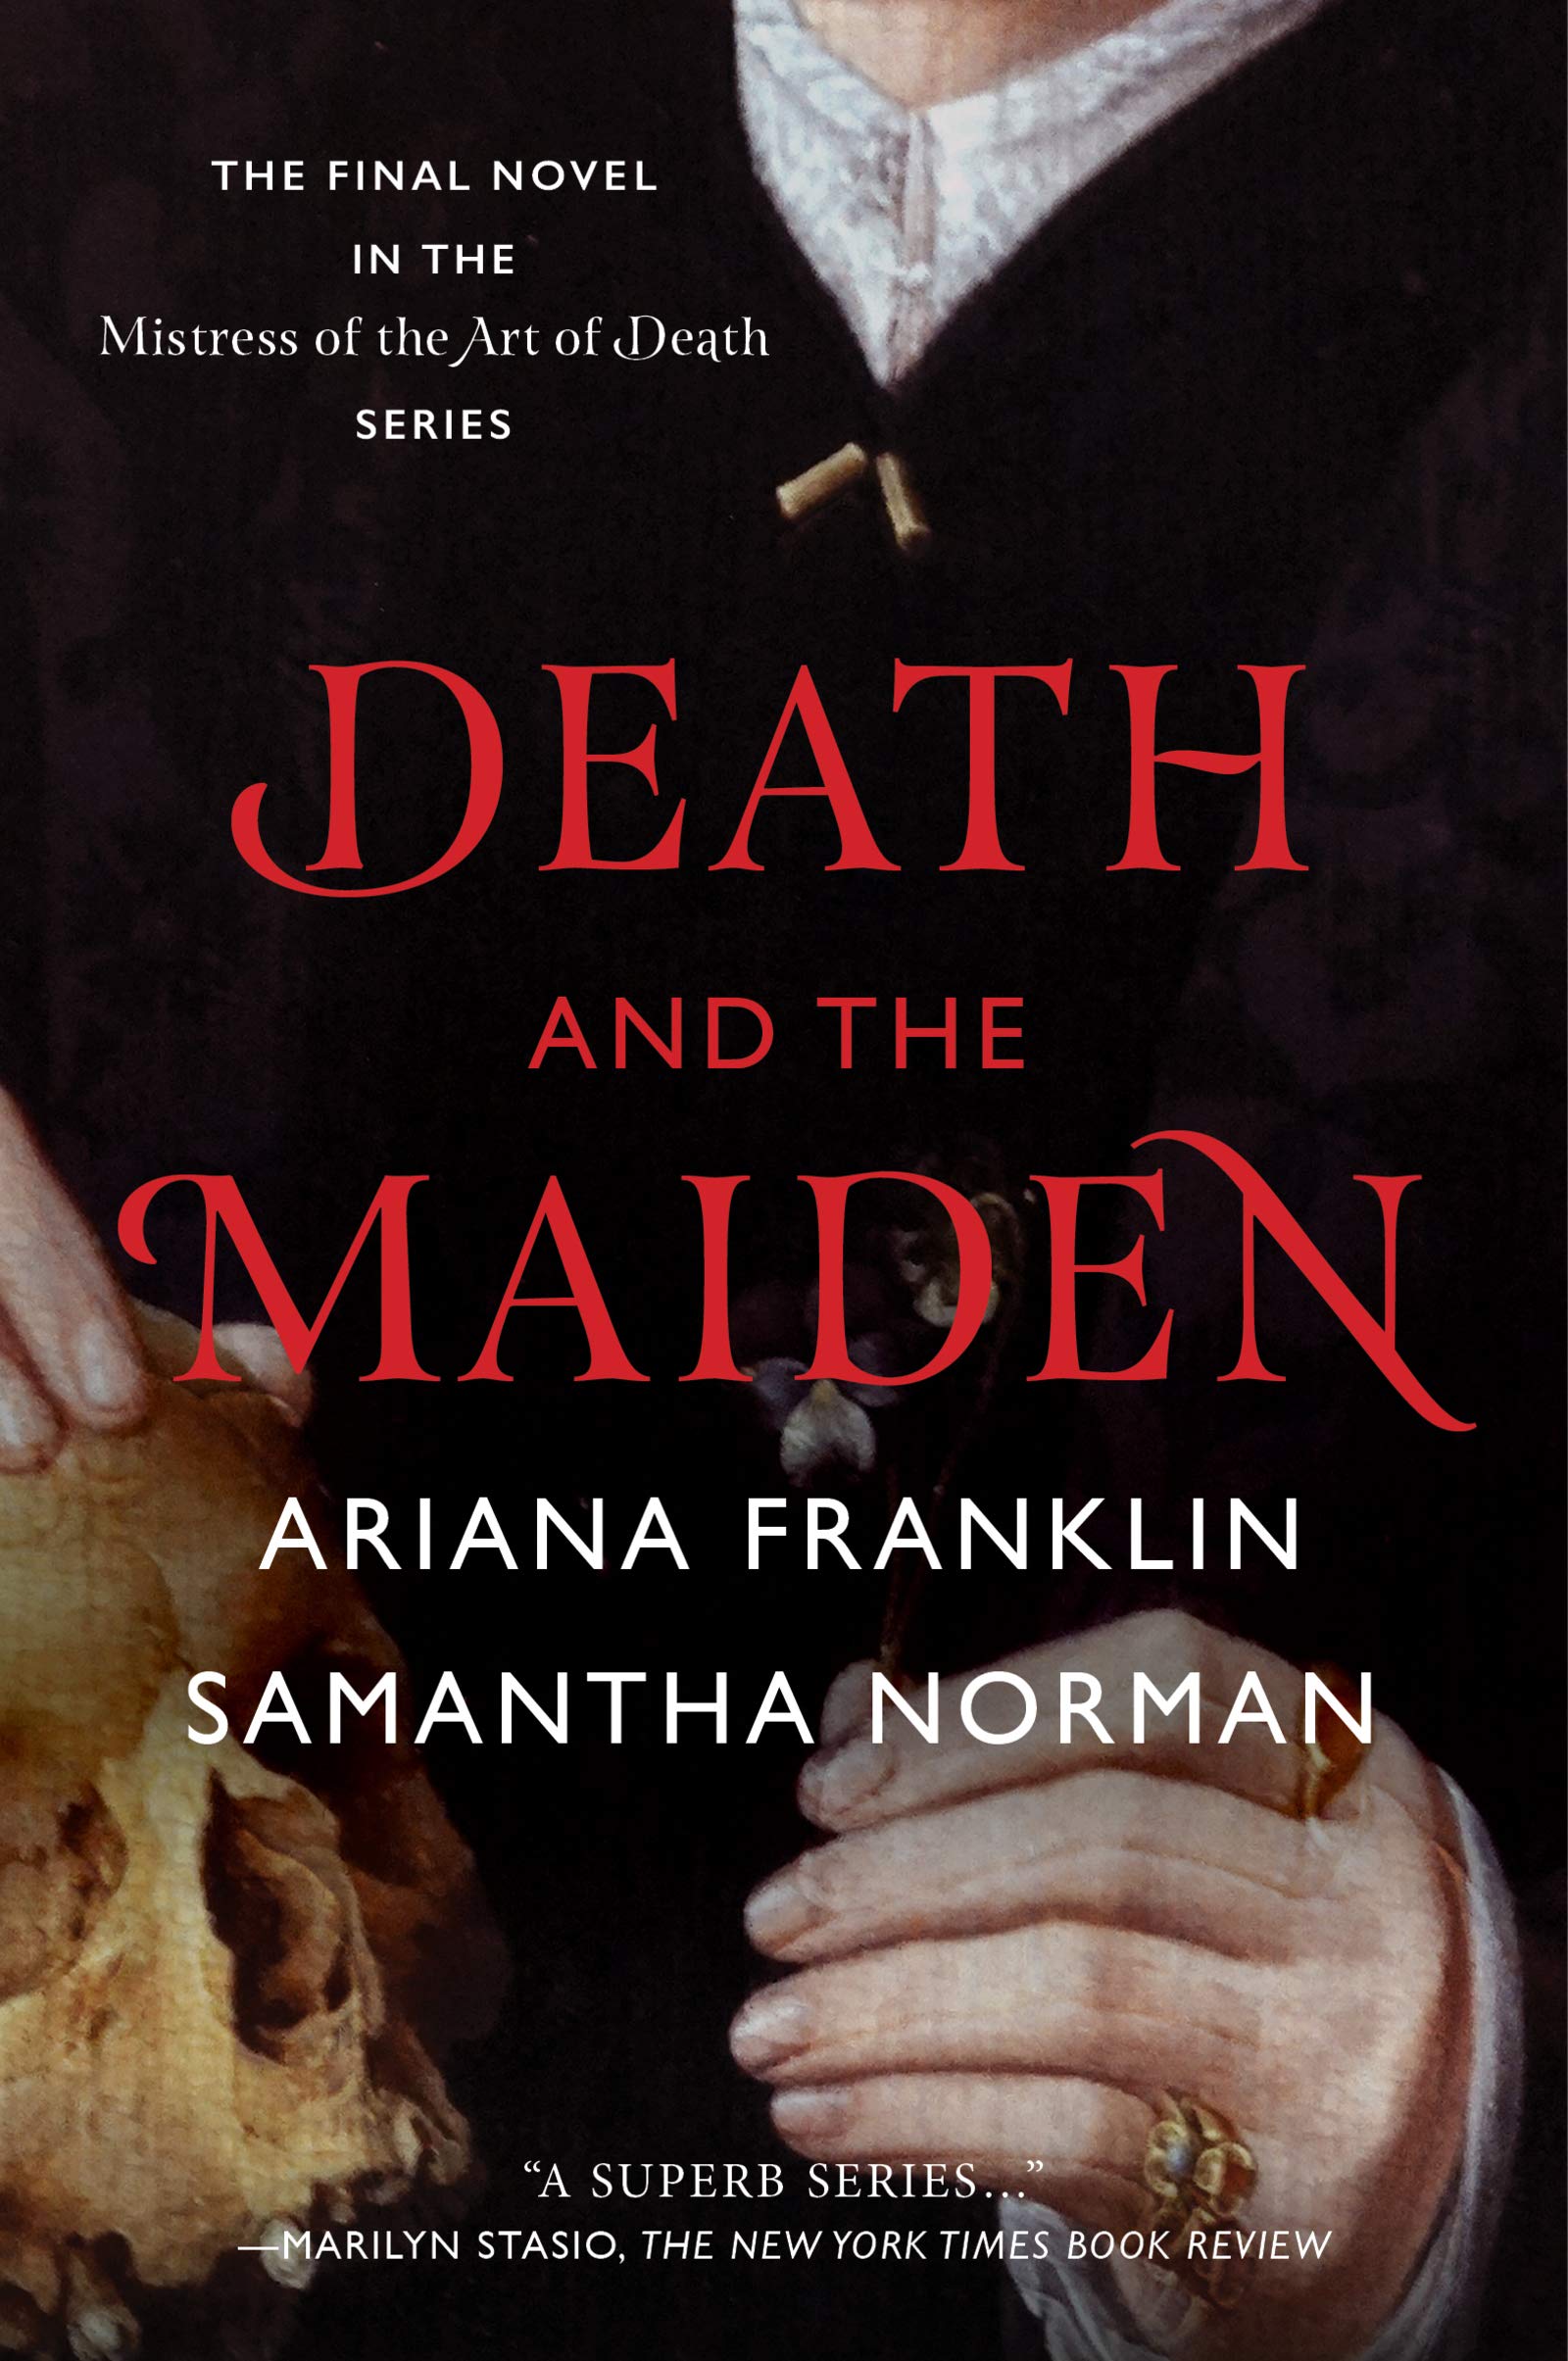 DEATH AND THE MAIDEN PB